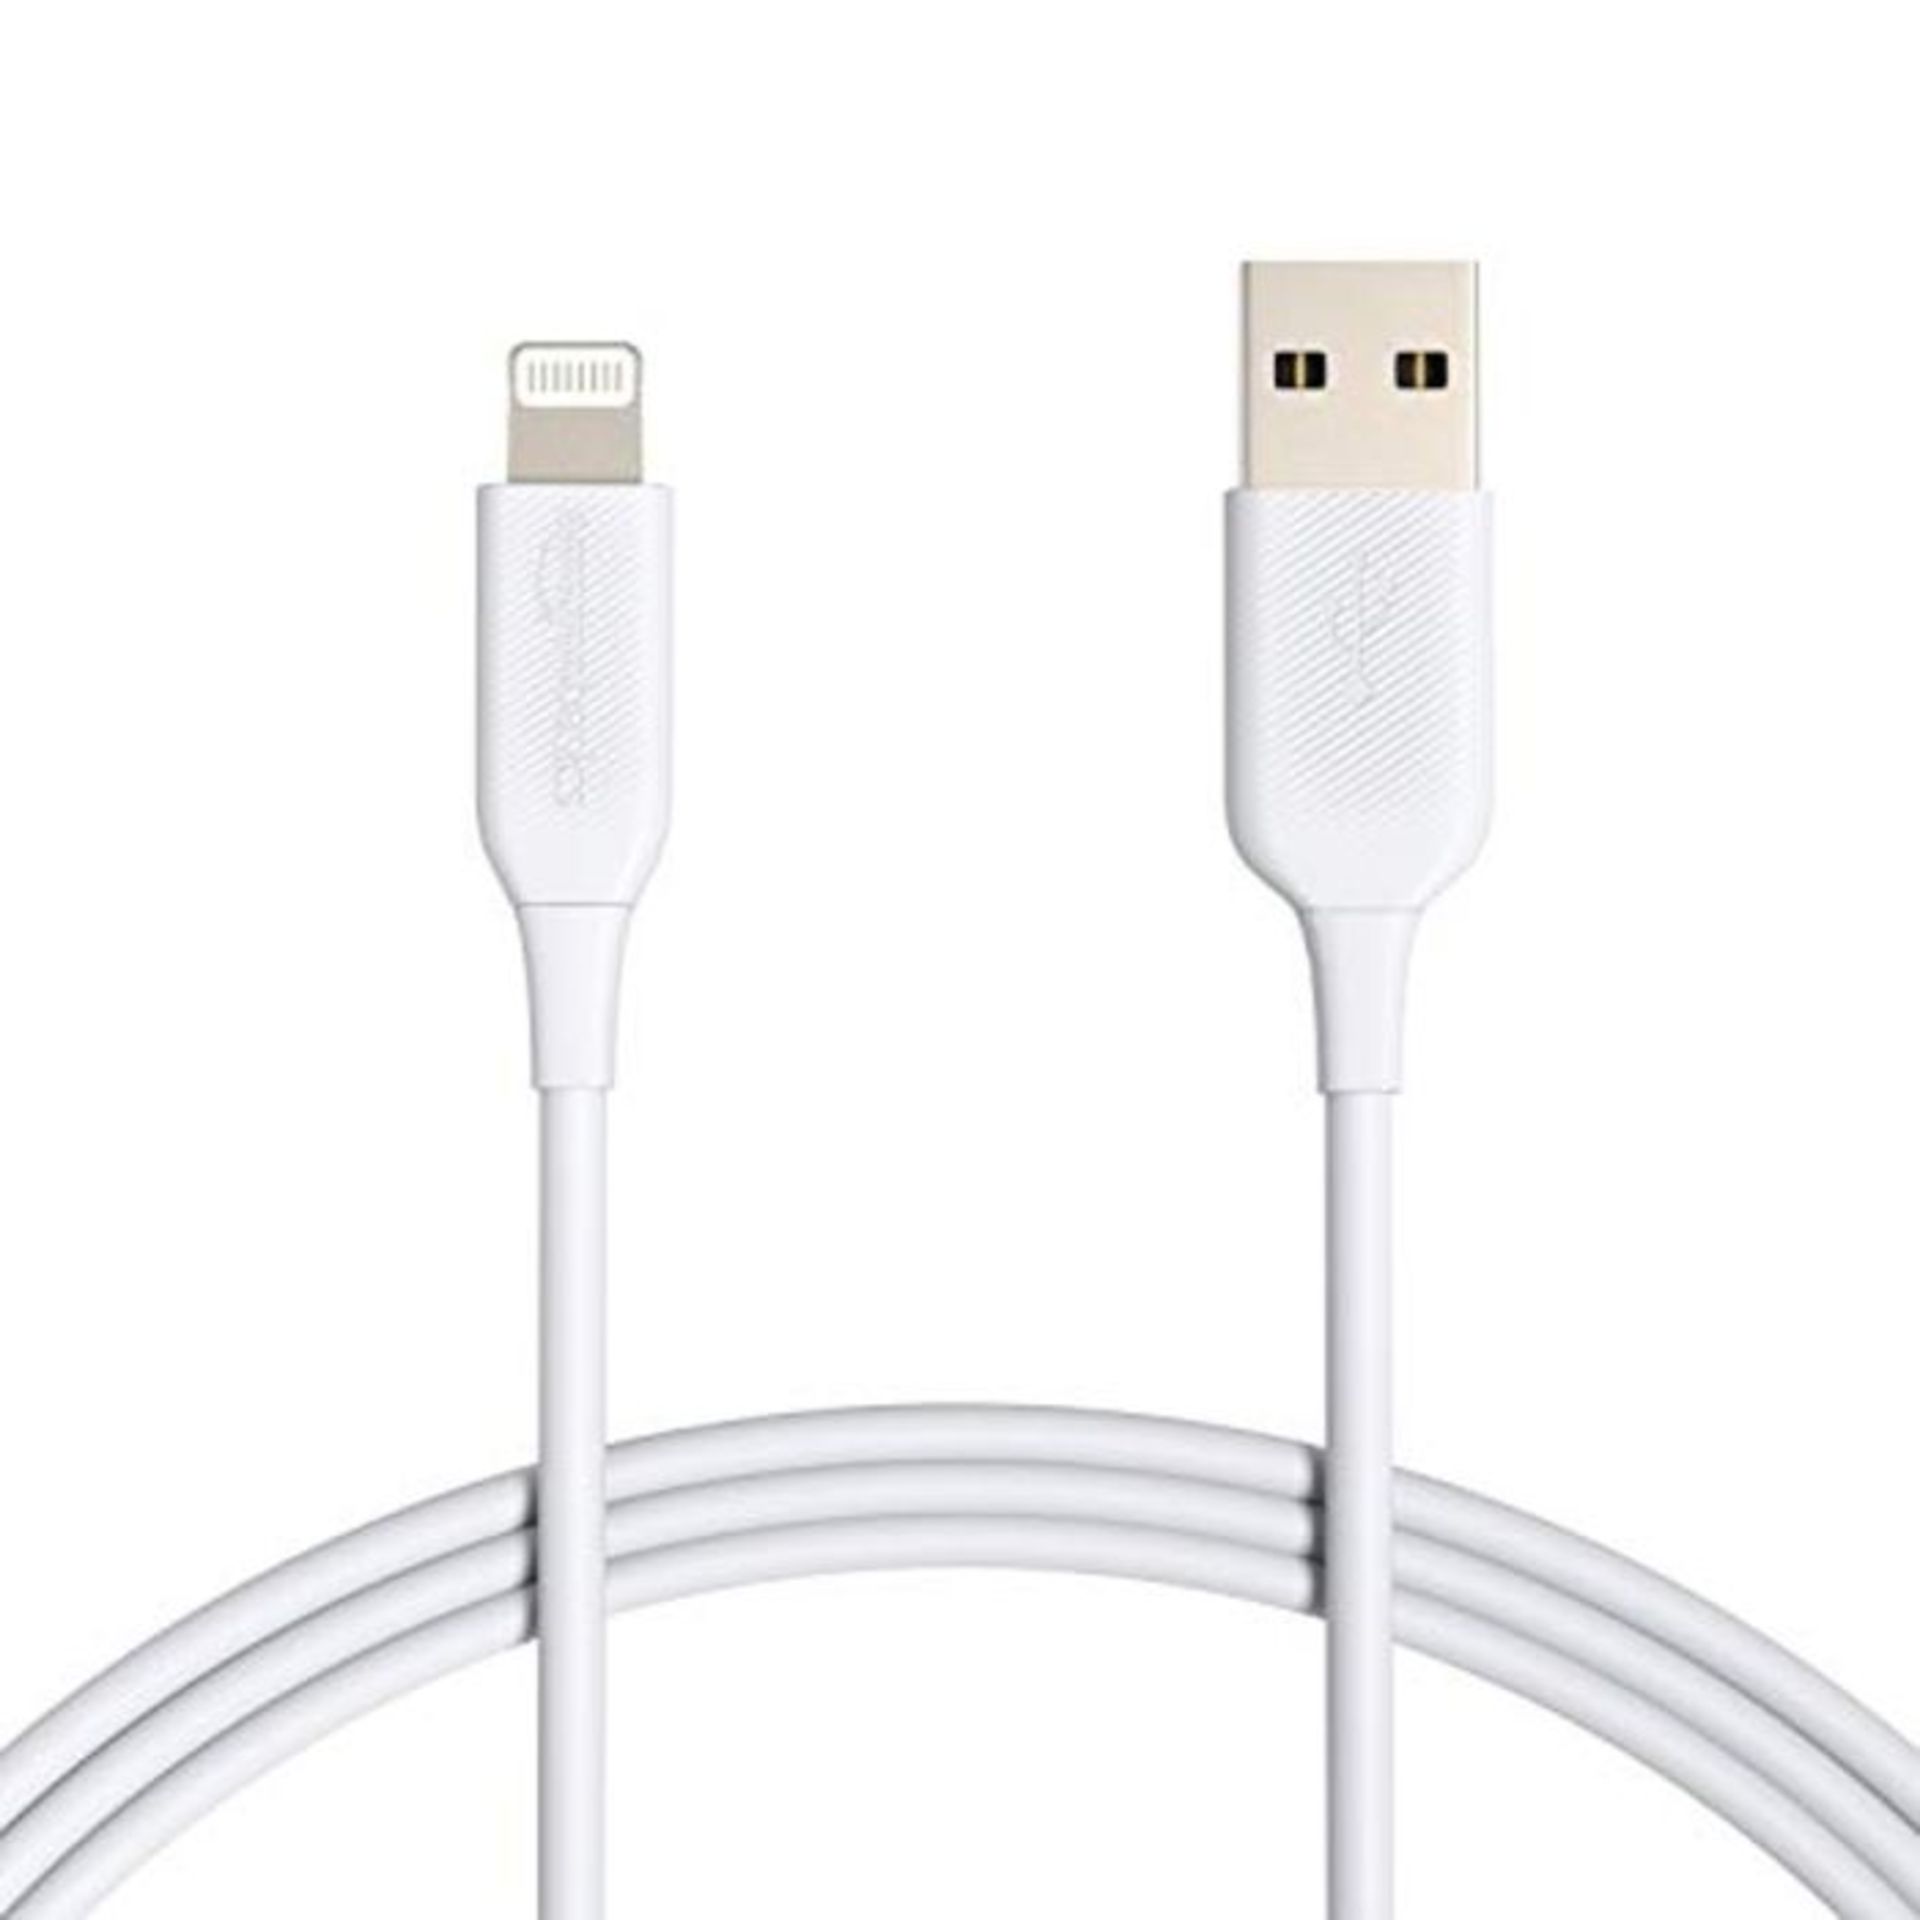 Amazon Basics Lightning to USB A Cable - MFi Certified iPhone Charger, White, 1.82 m